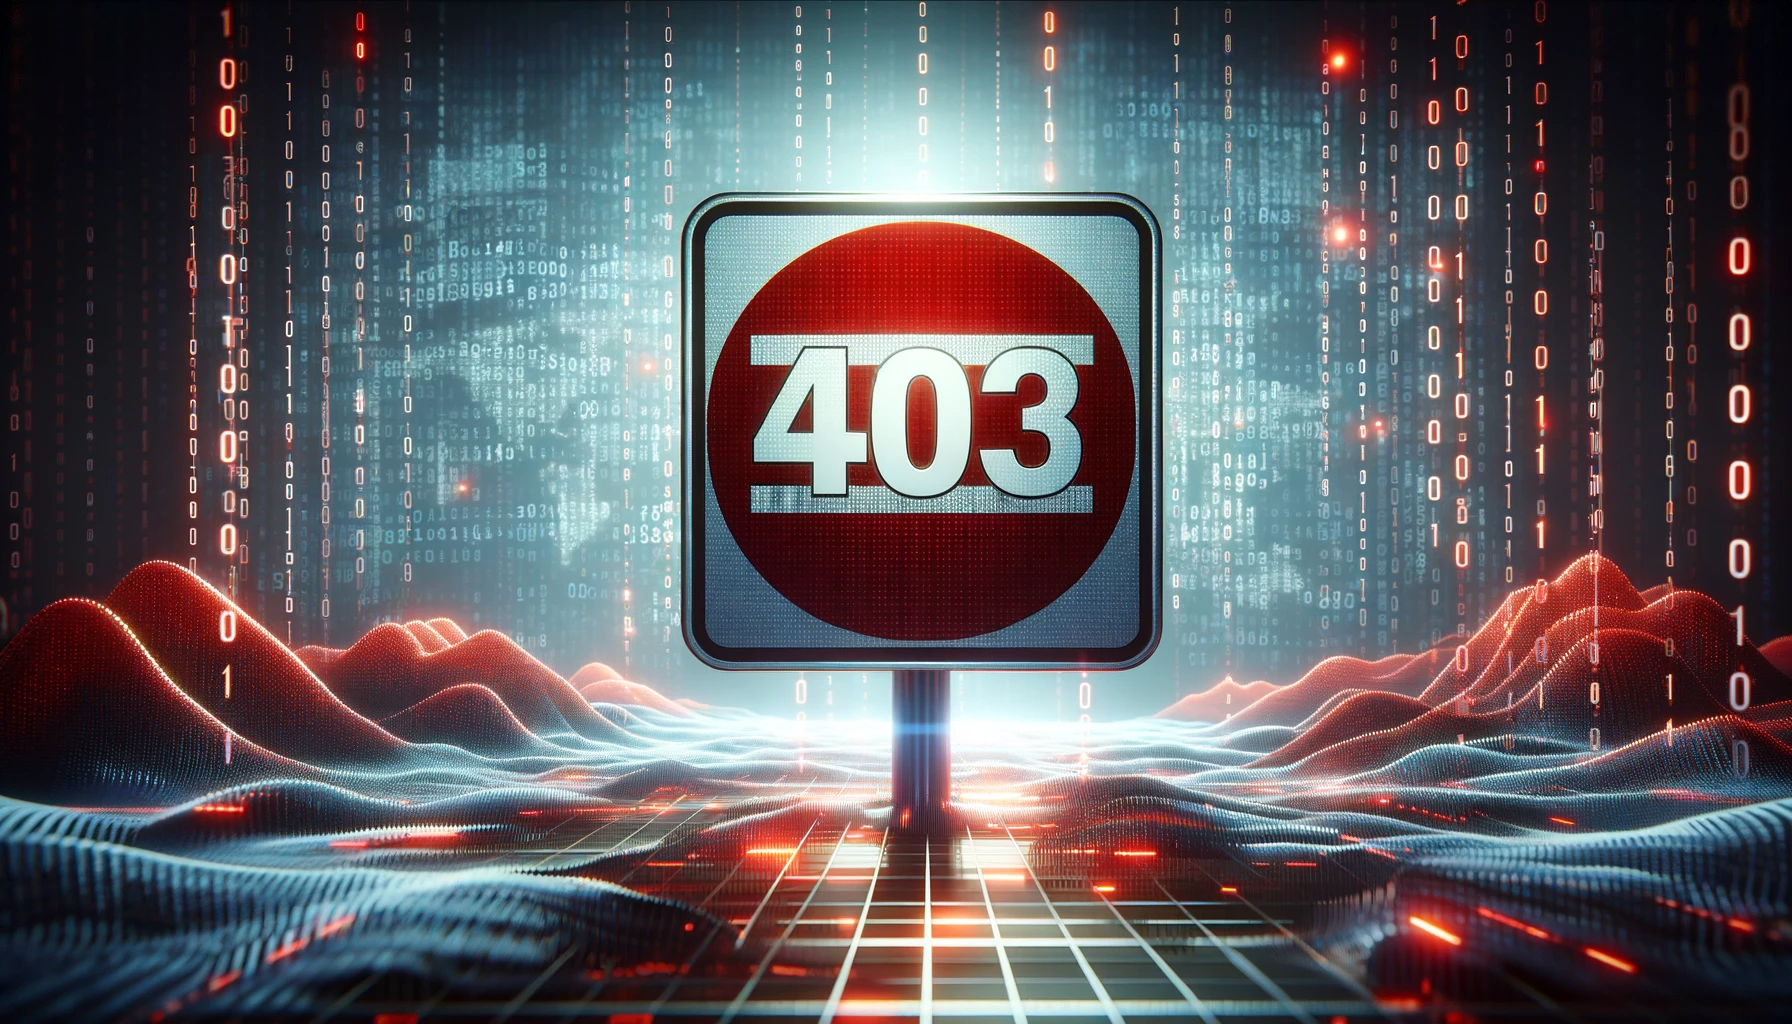 The number 403 standing for the 403 error depicted as a no entry road sign.